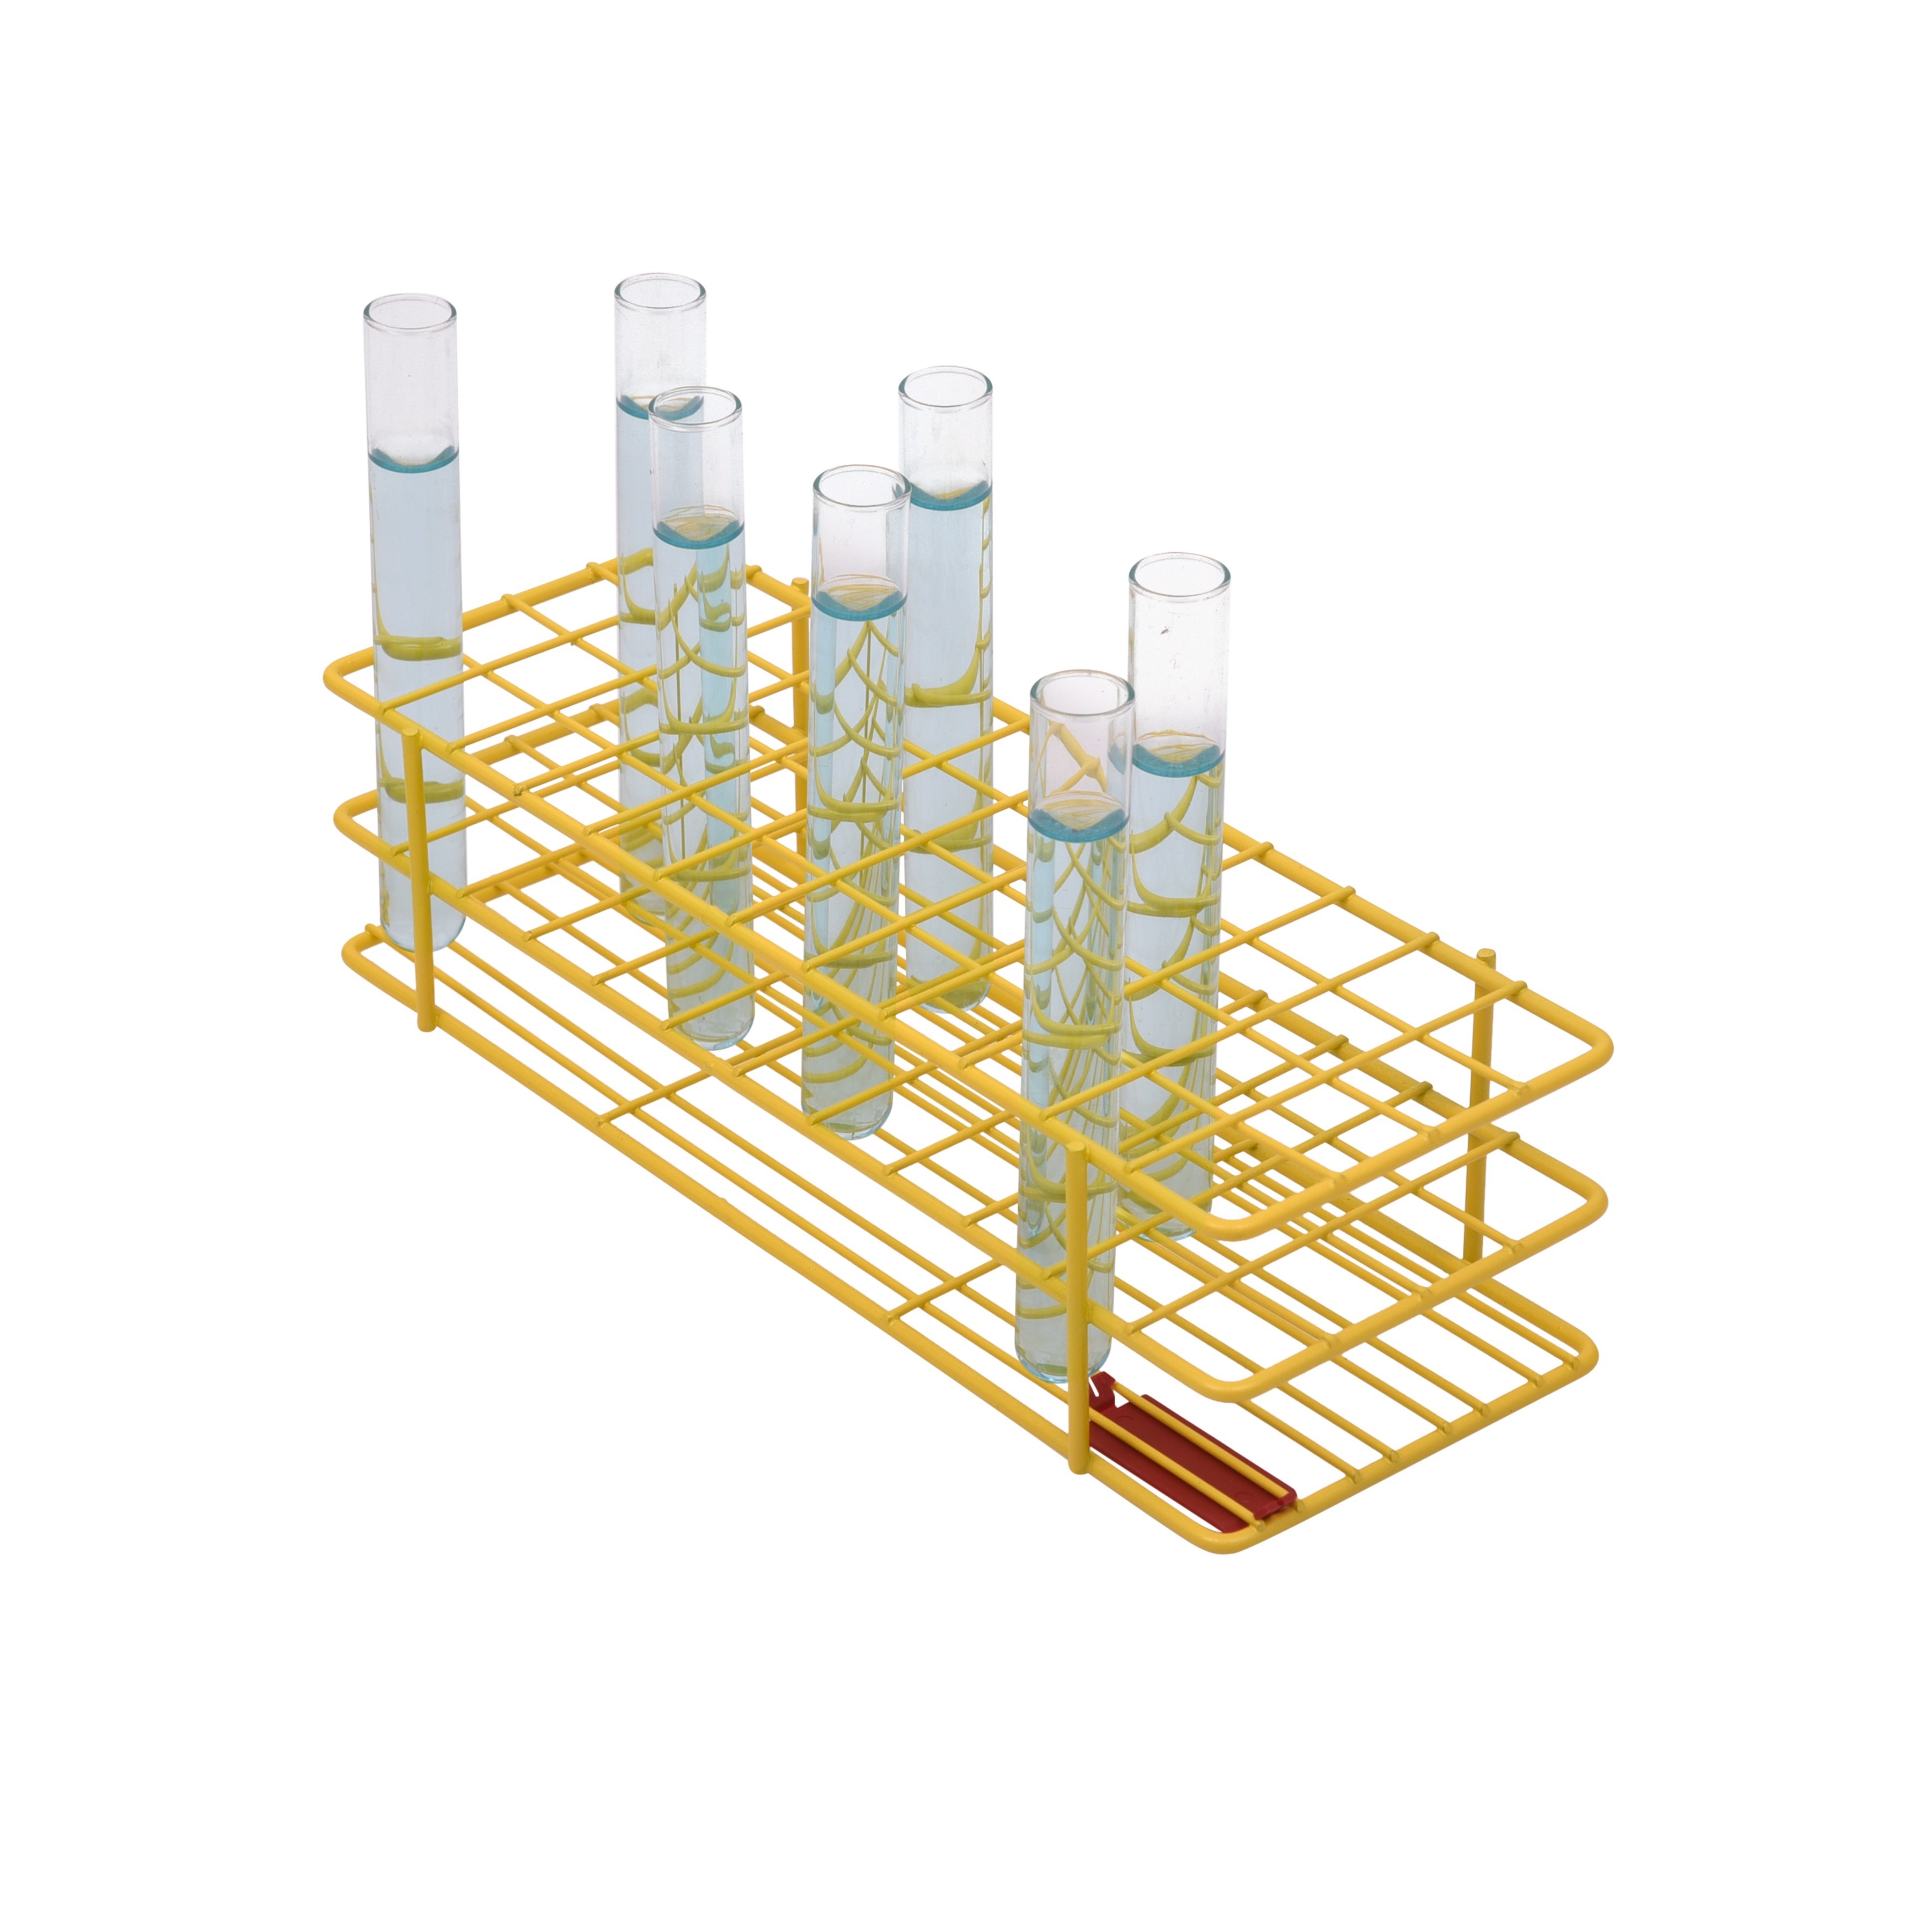 SP Bel-Art Poxygrid Test Tube Rack; For 13-16mm Tubes, 48 Places, Yellow